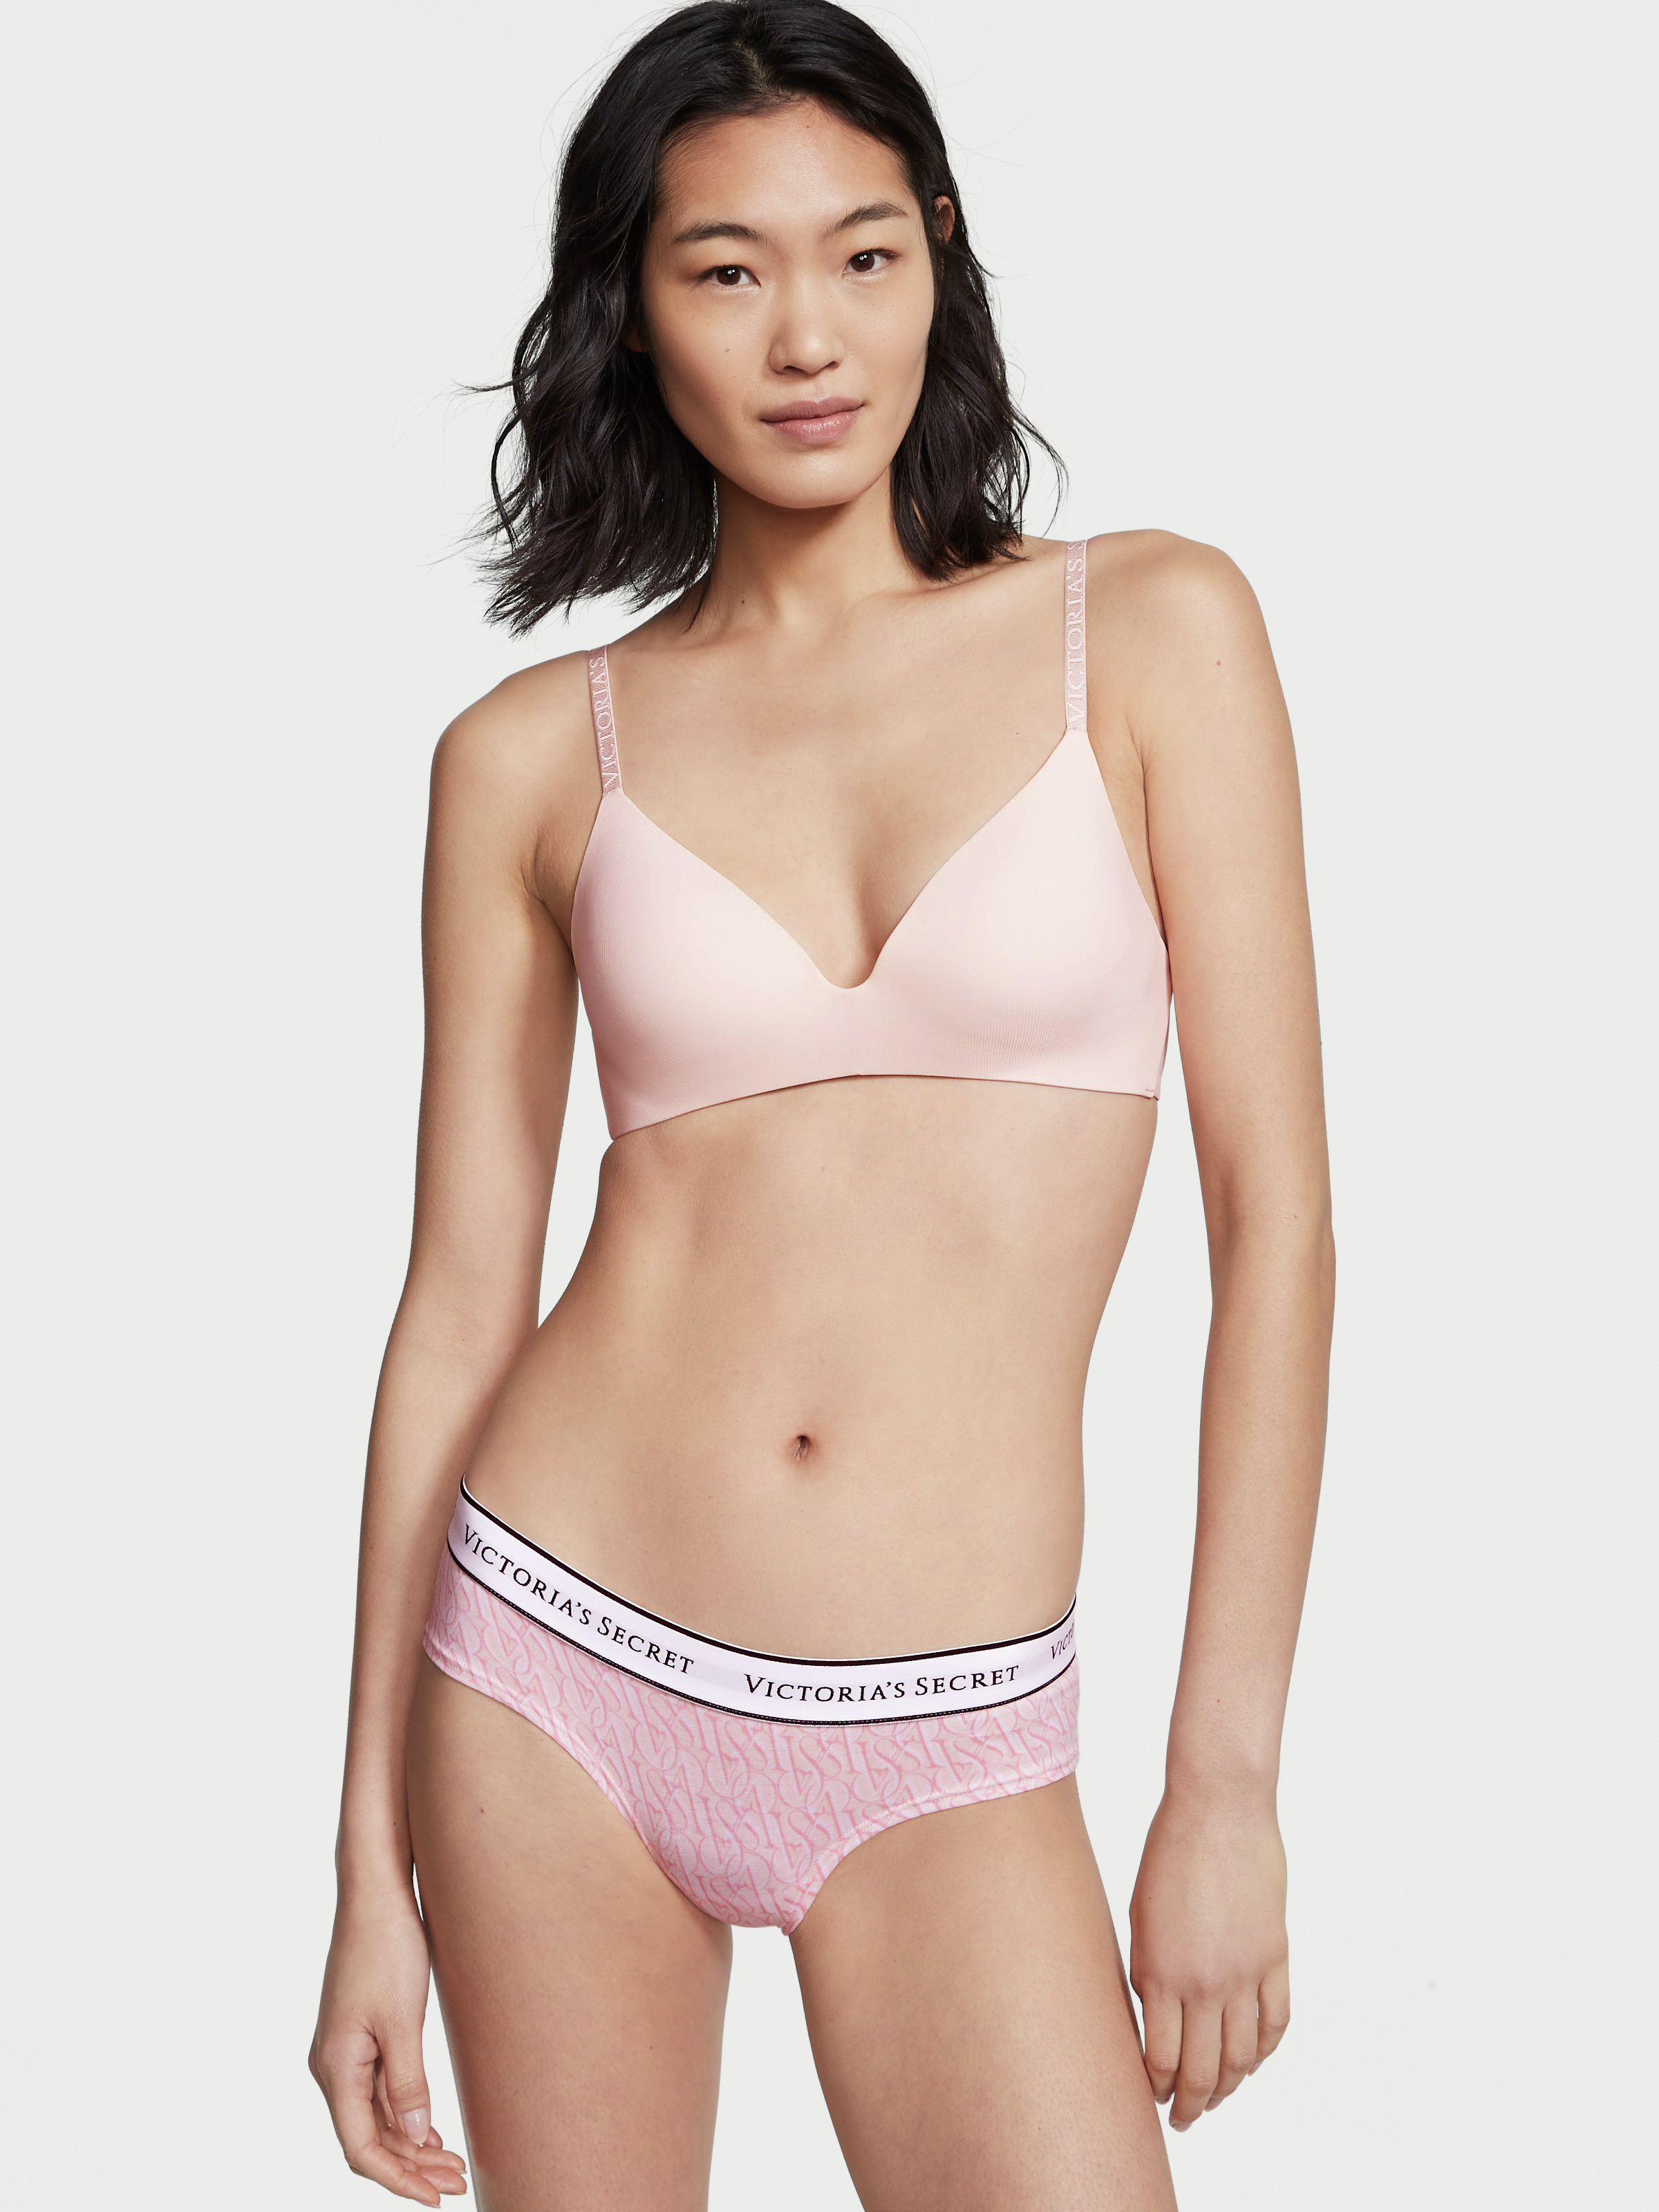 Victoria's Secret Blossom Pink Lace Trim Cotton Cheeky Knickers